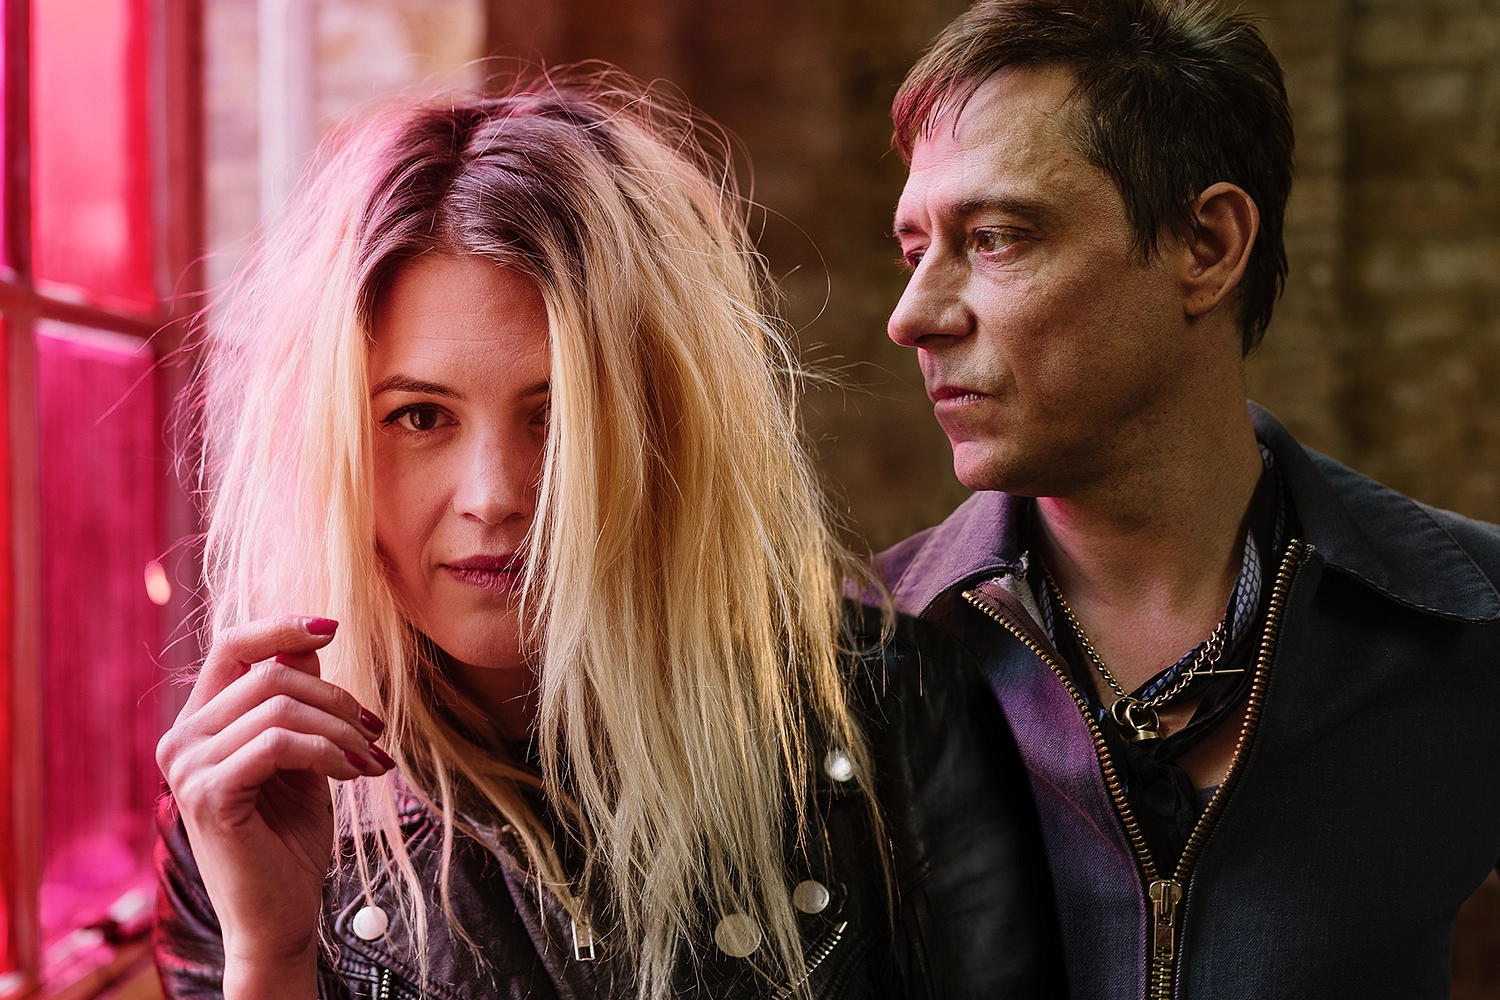 The Kills: “This feeling of completeness - with art, that’s a big thing”